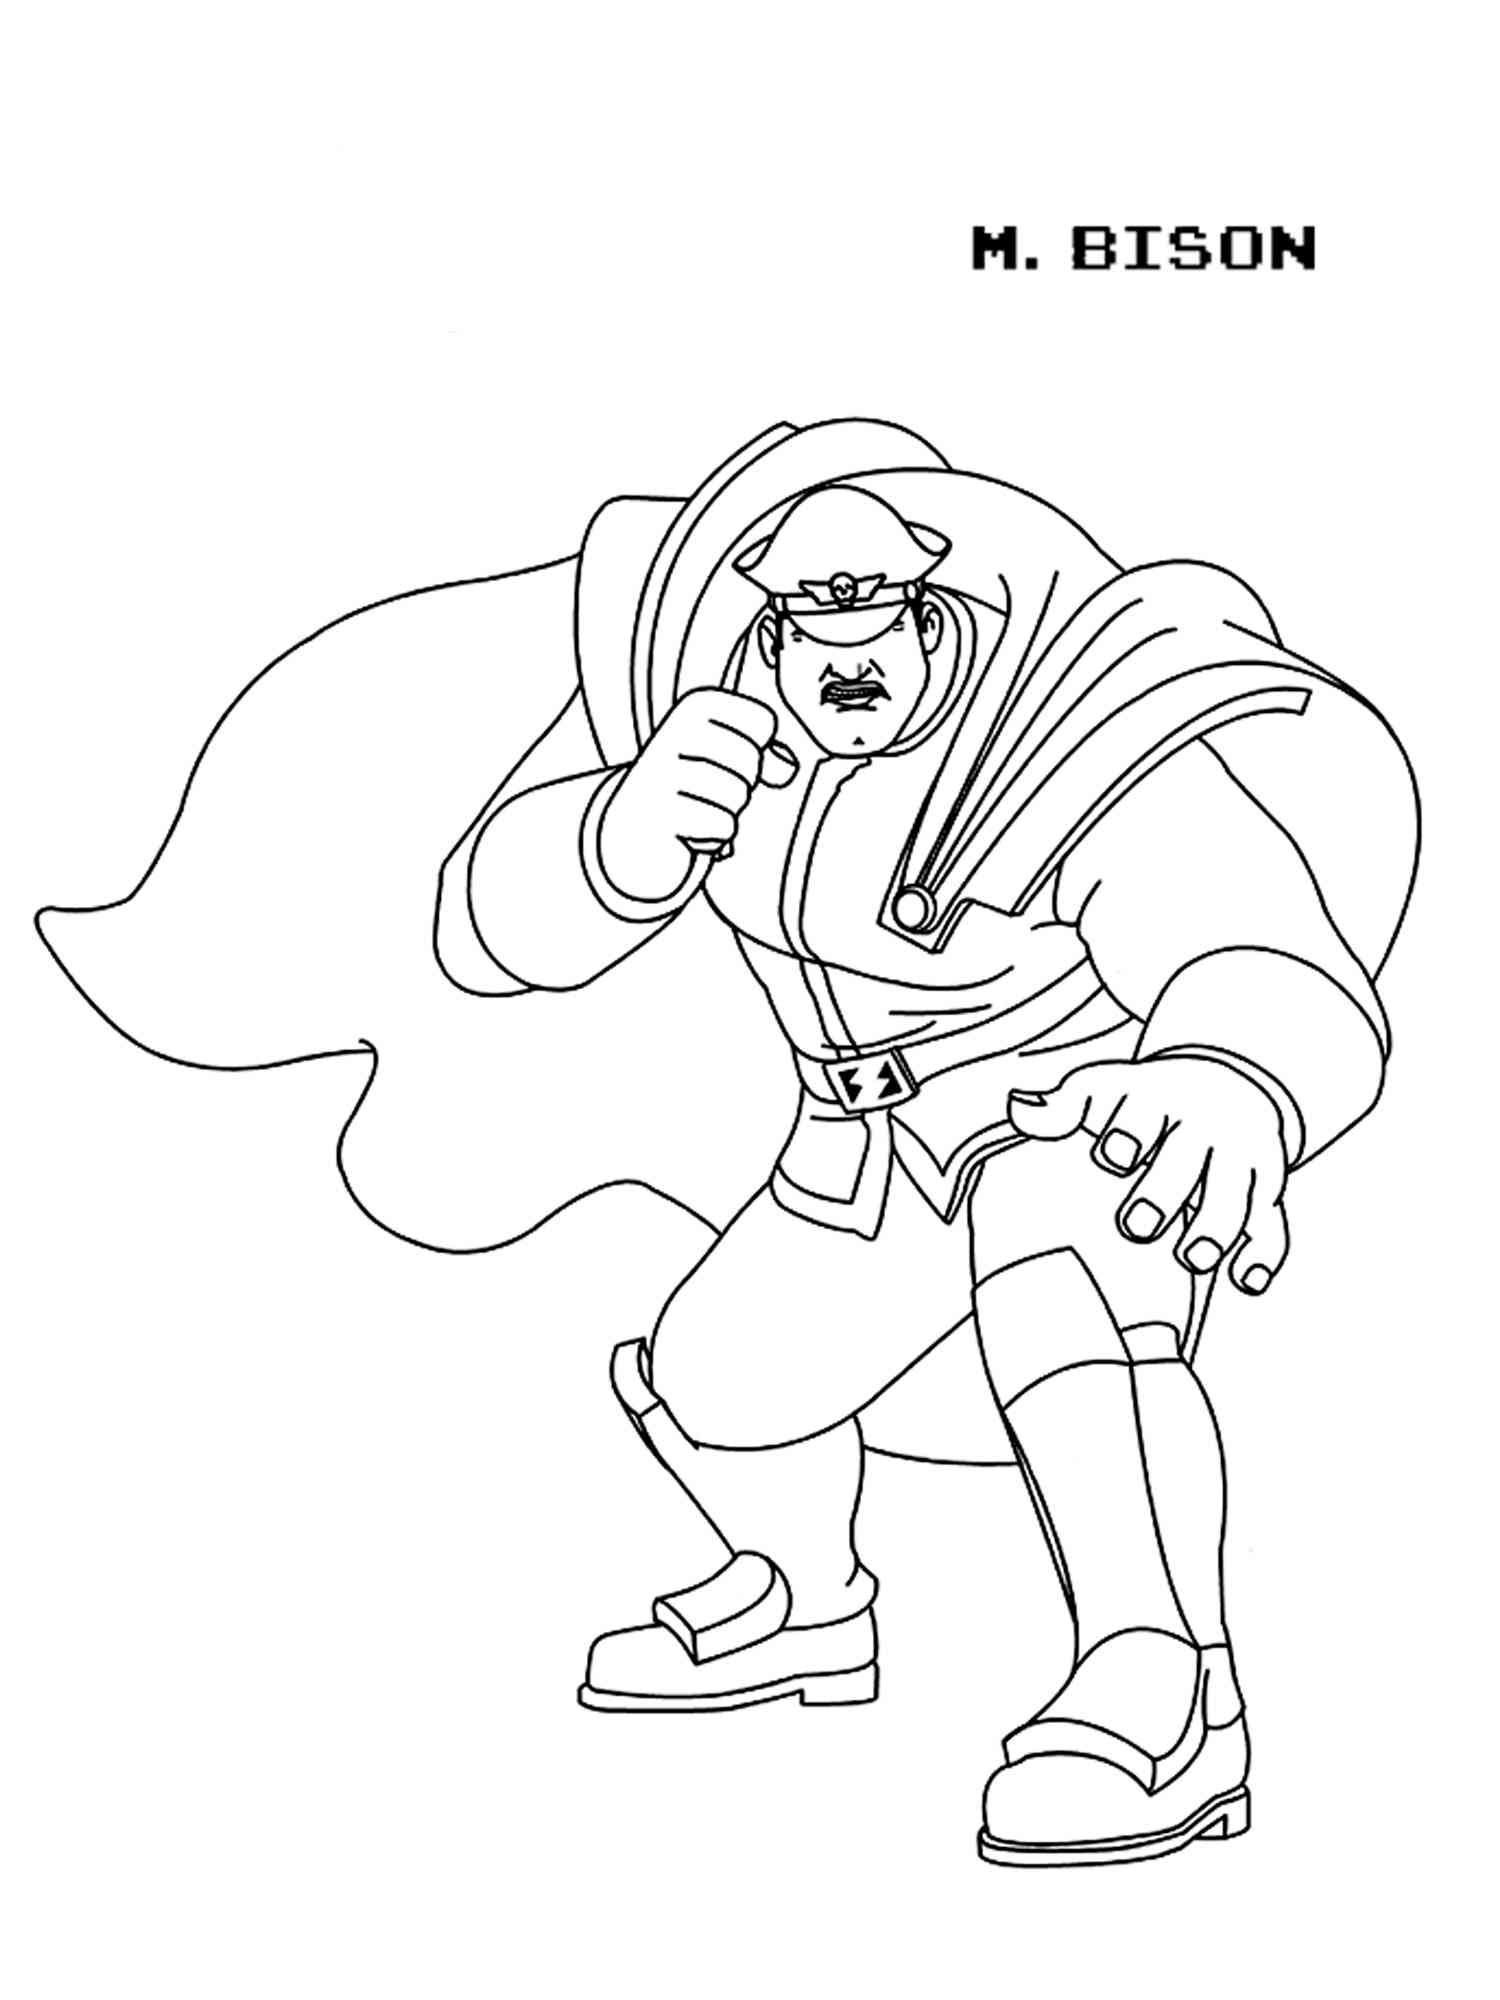 Street Fighter M. Bison coloring page